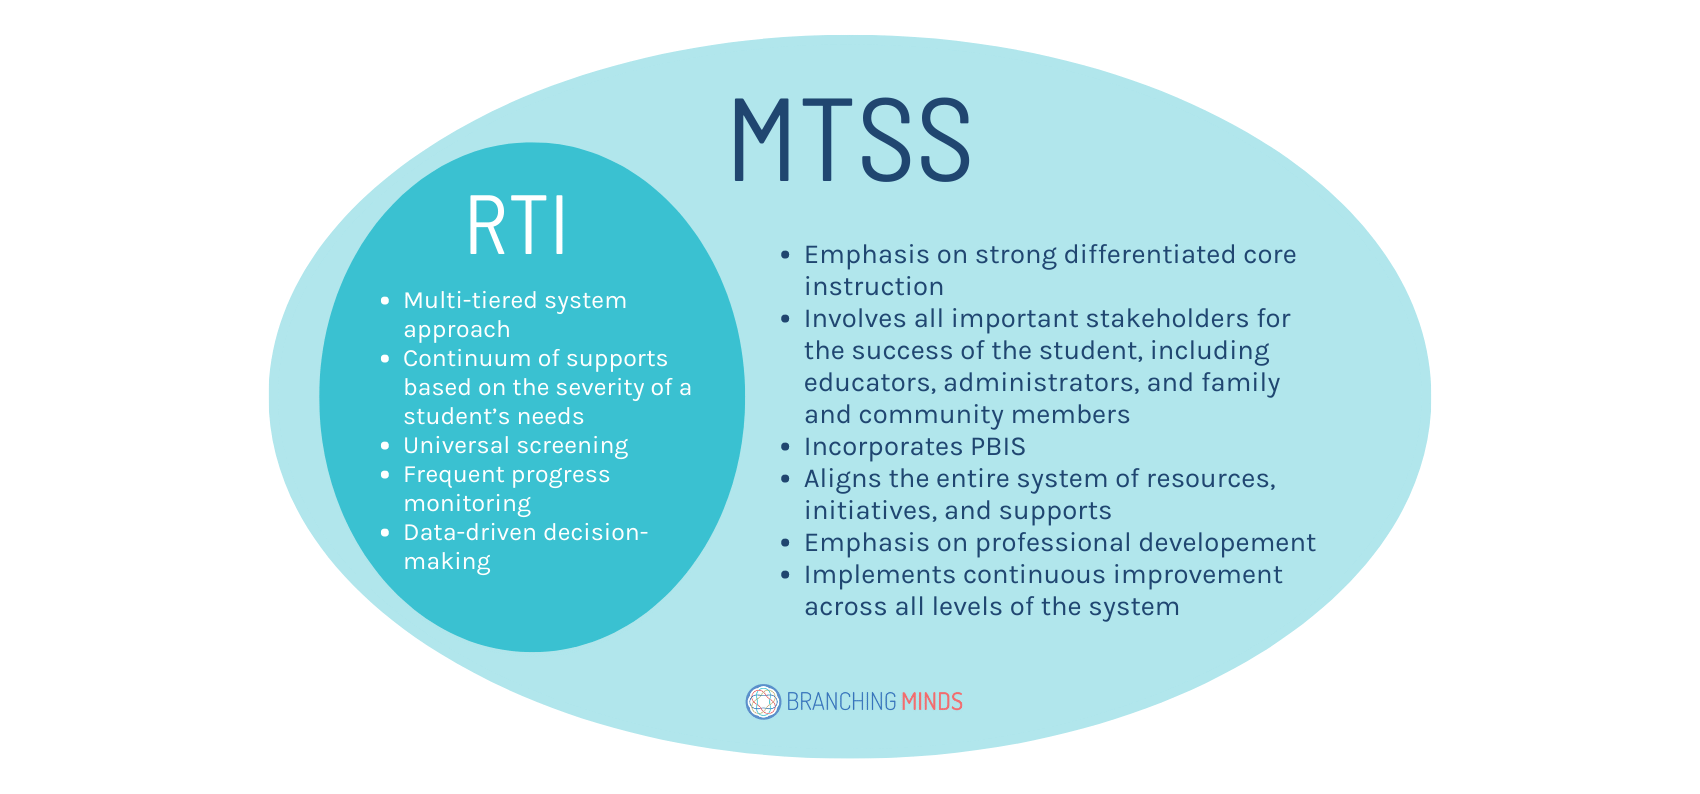 What Do the Tiers Mean in an MTSS / RTI Model?